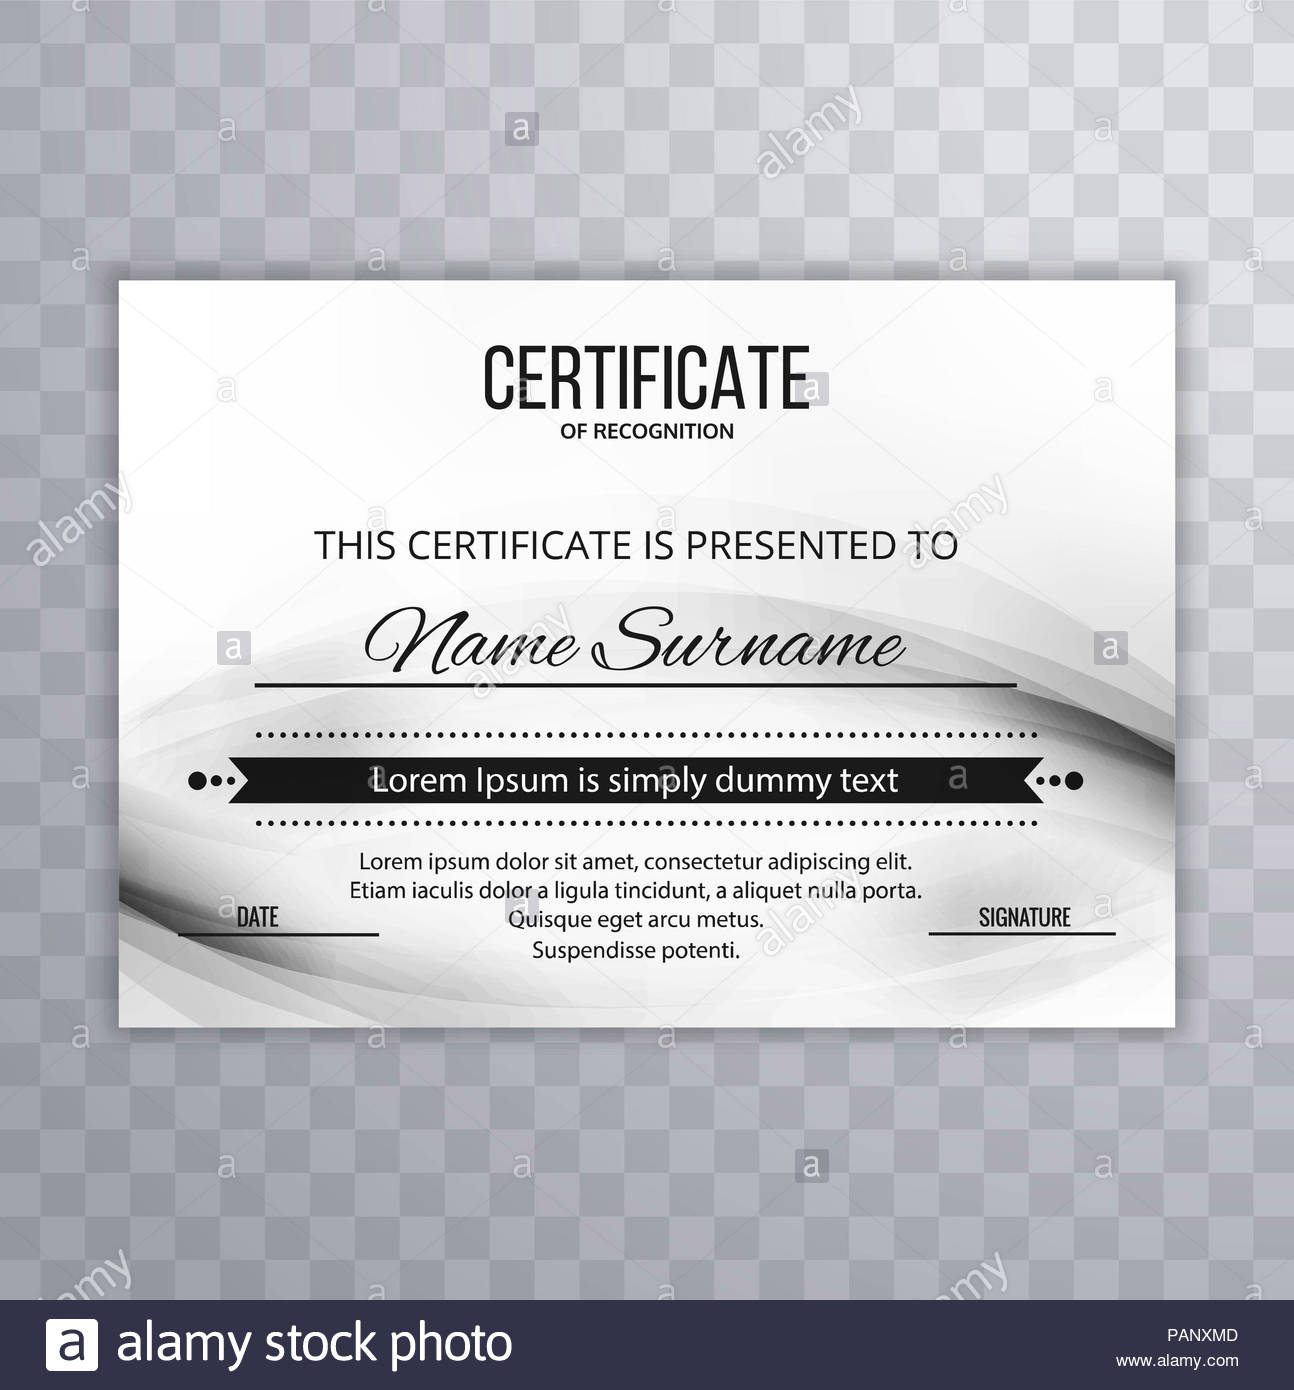 Modern Certificate Template Design Stock Photo: 213152925 With Borderless Certificate Templates